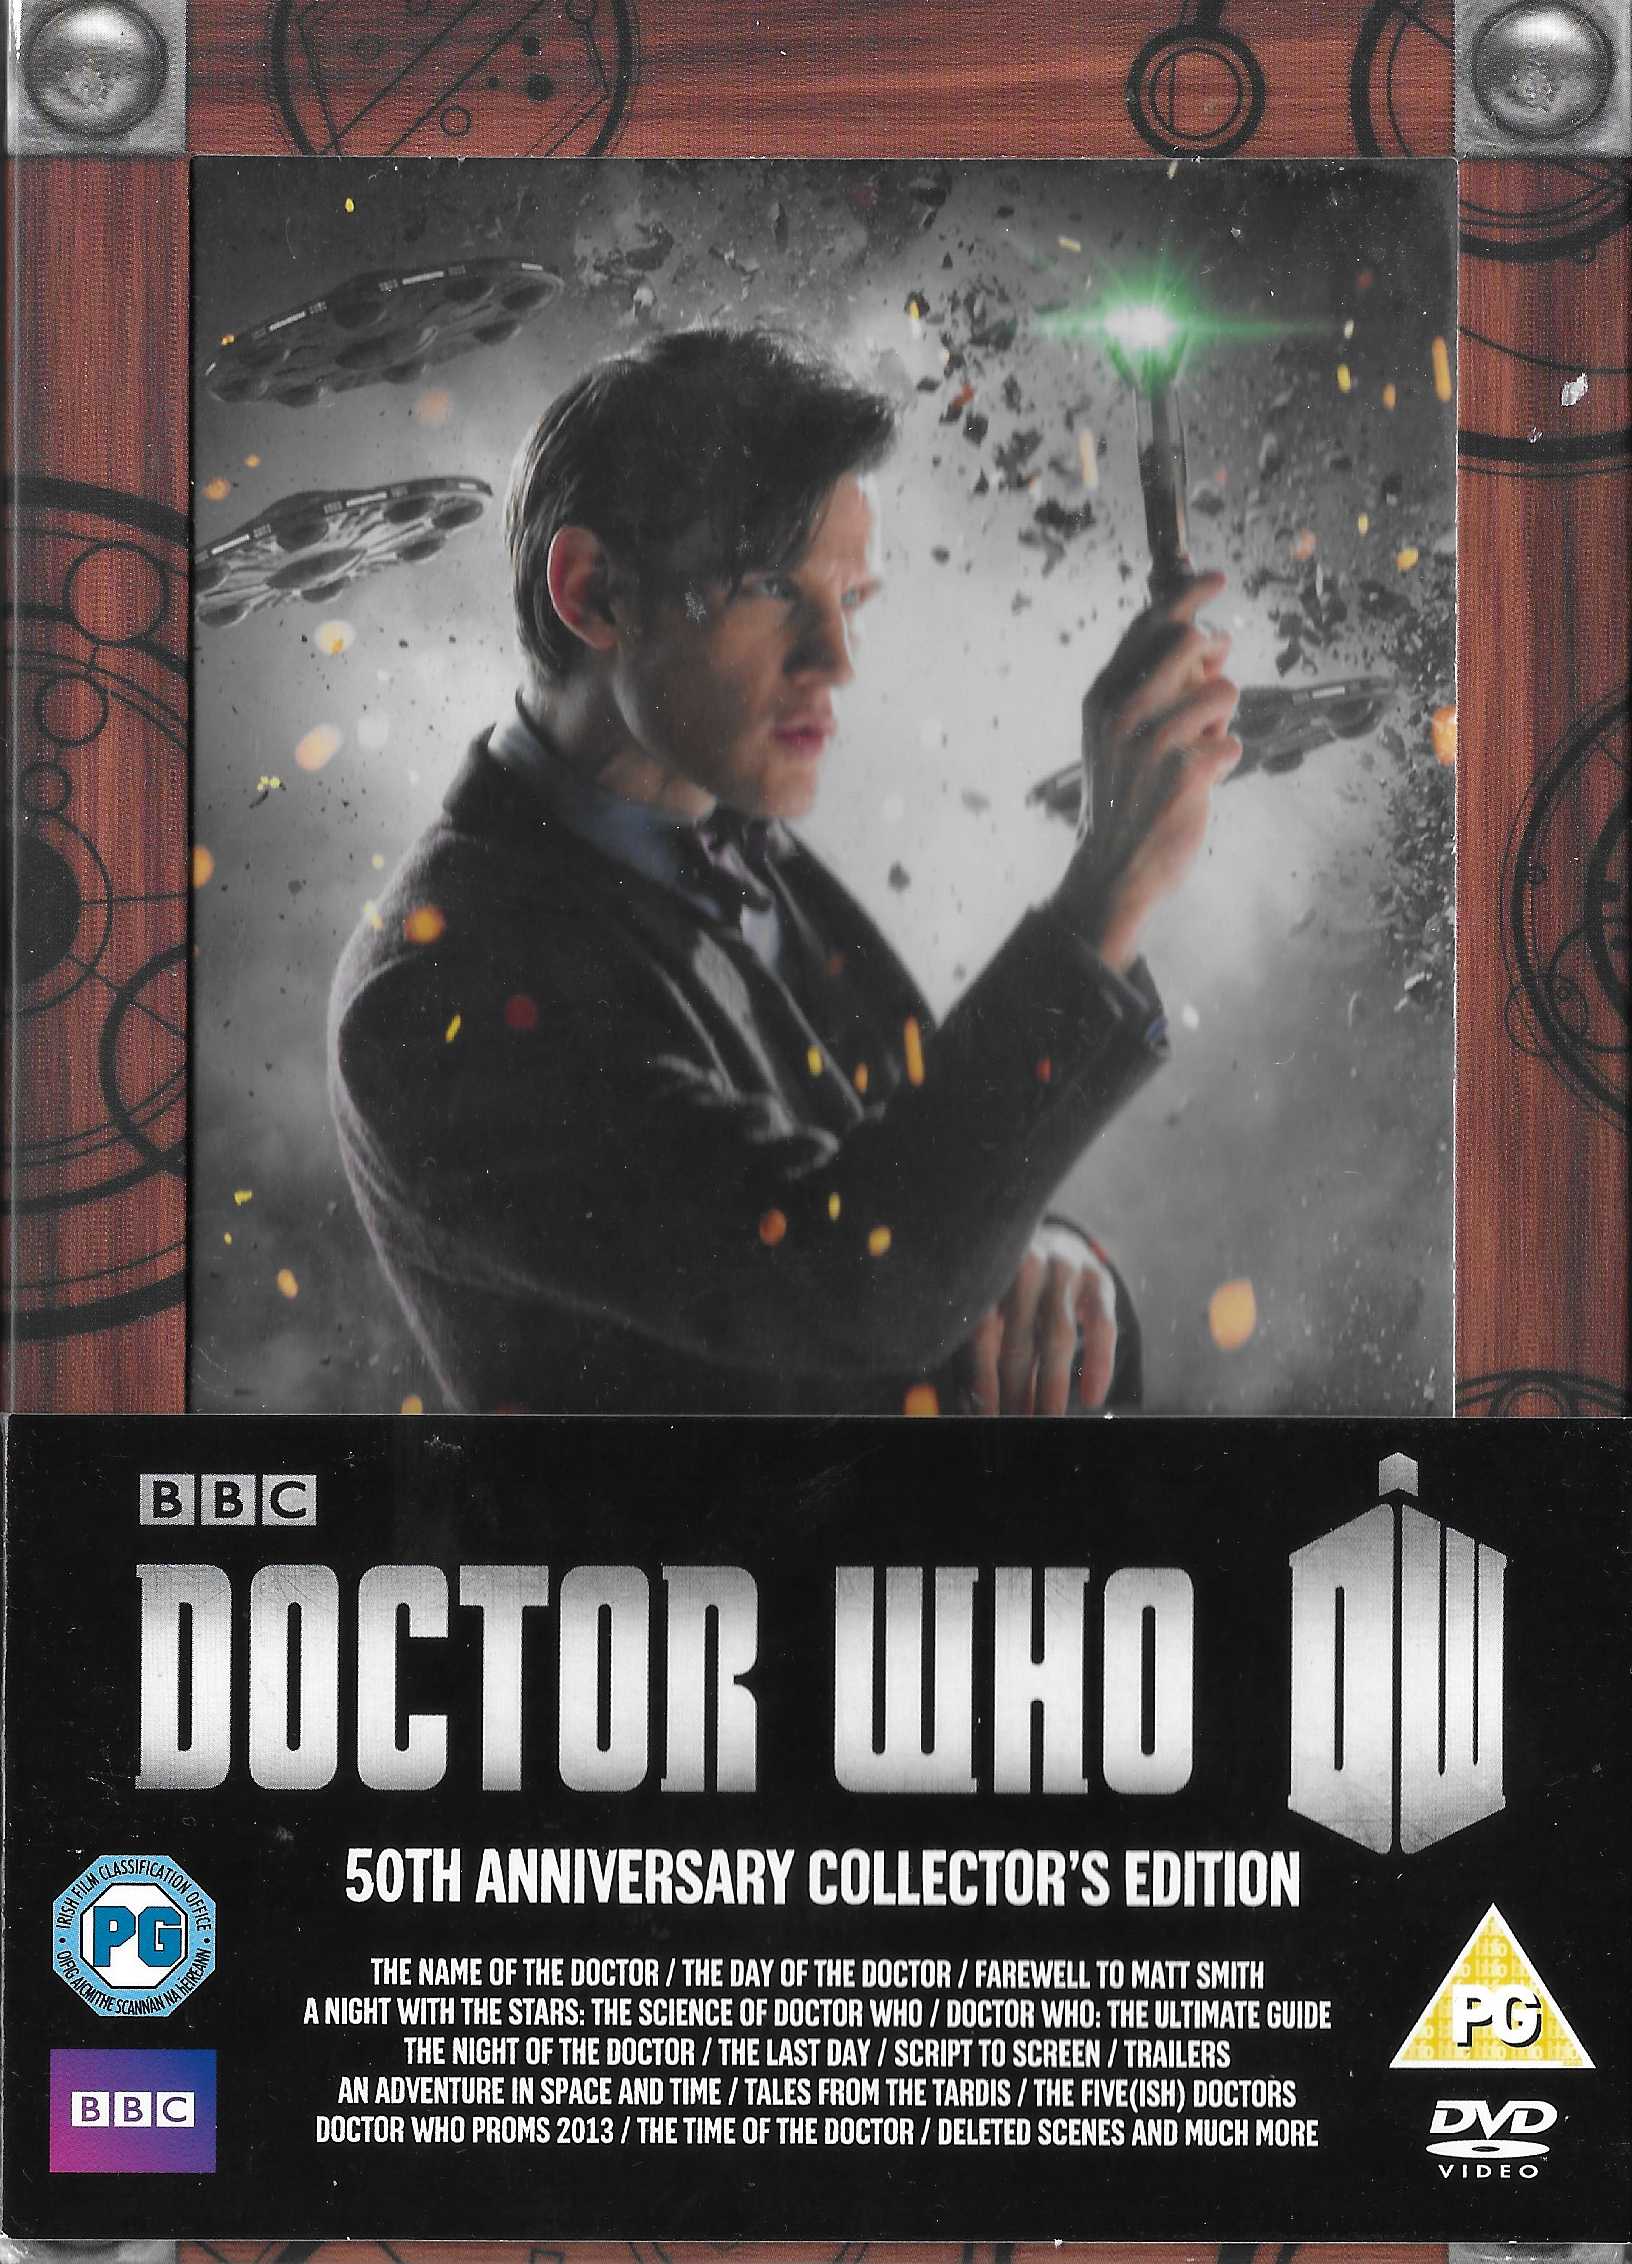 Picture of BBCDVD 3933 Doctor Who - 50th anniversary collector\'s edition by artist Steven Moffat / Mark Gatiss from the BBC records and Tapes library